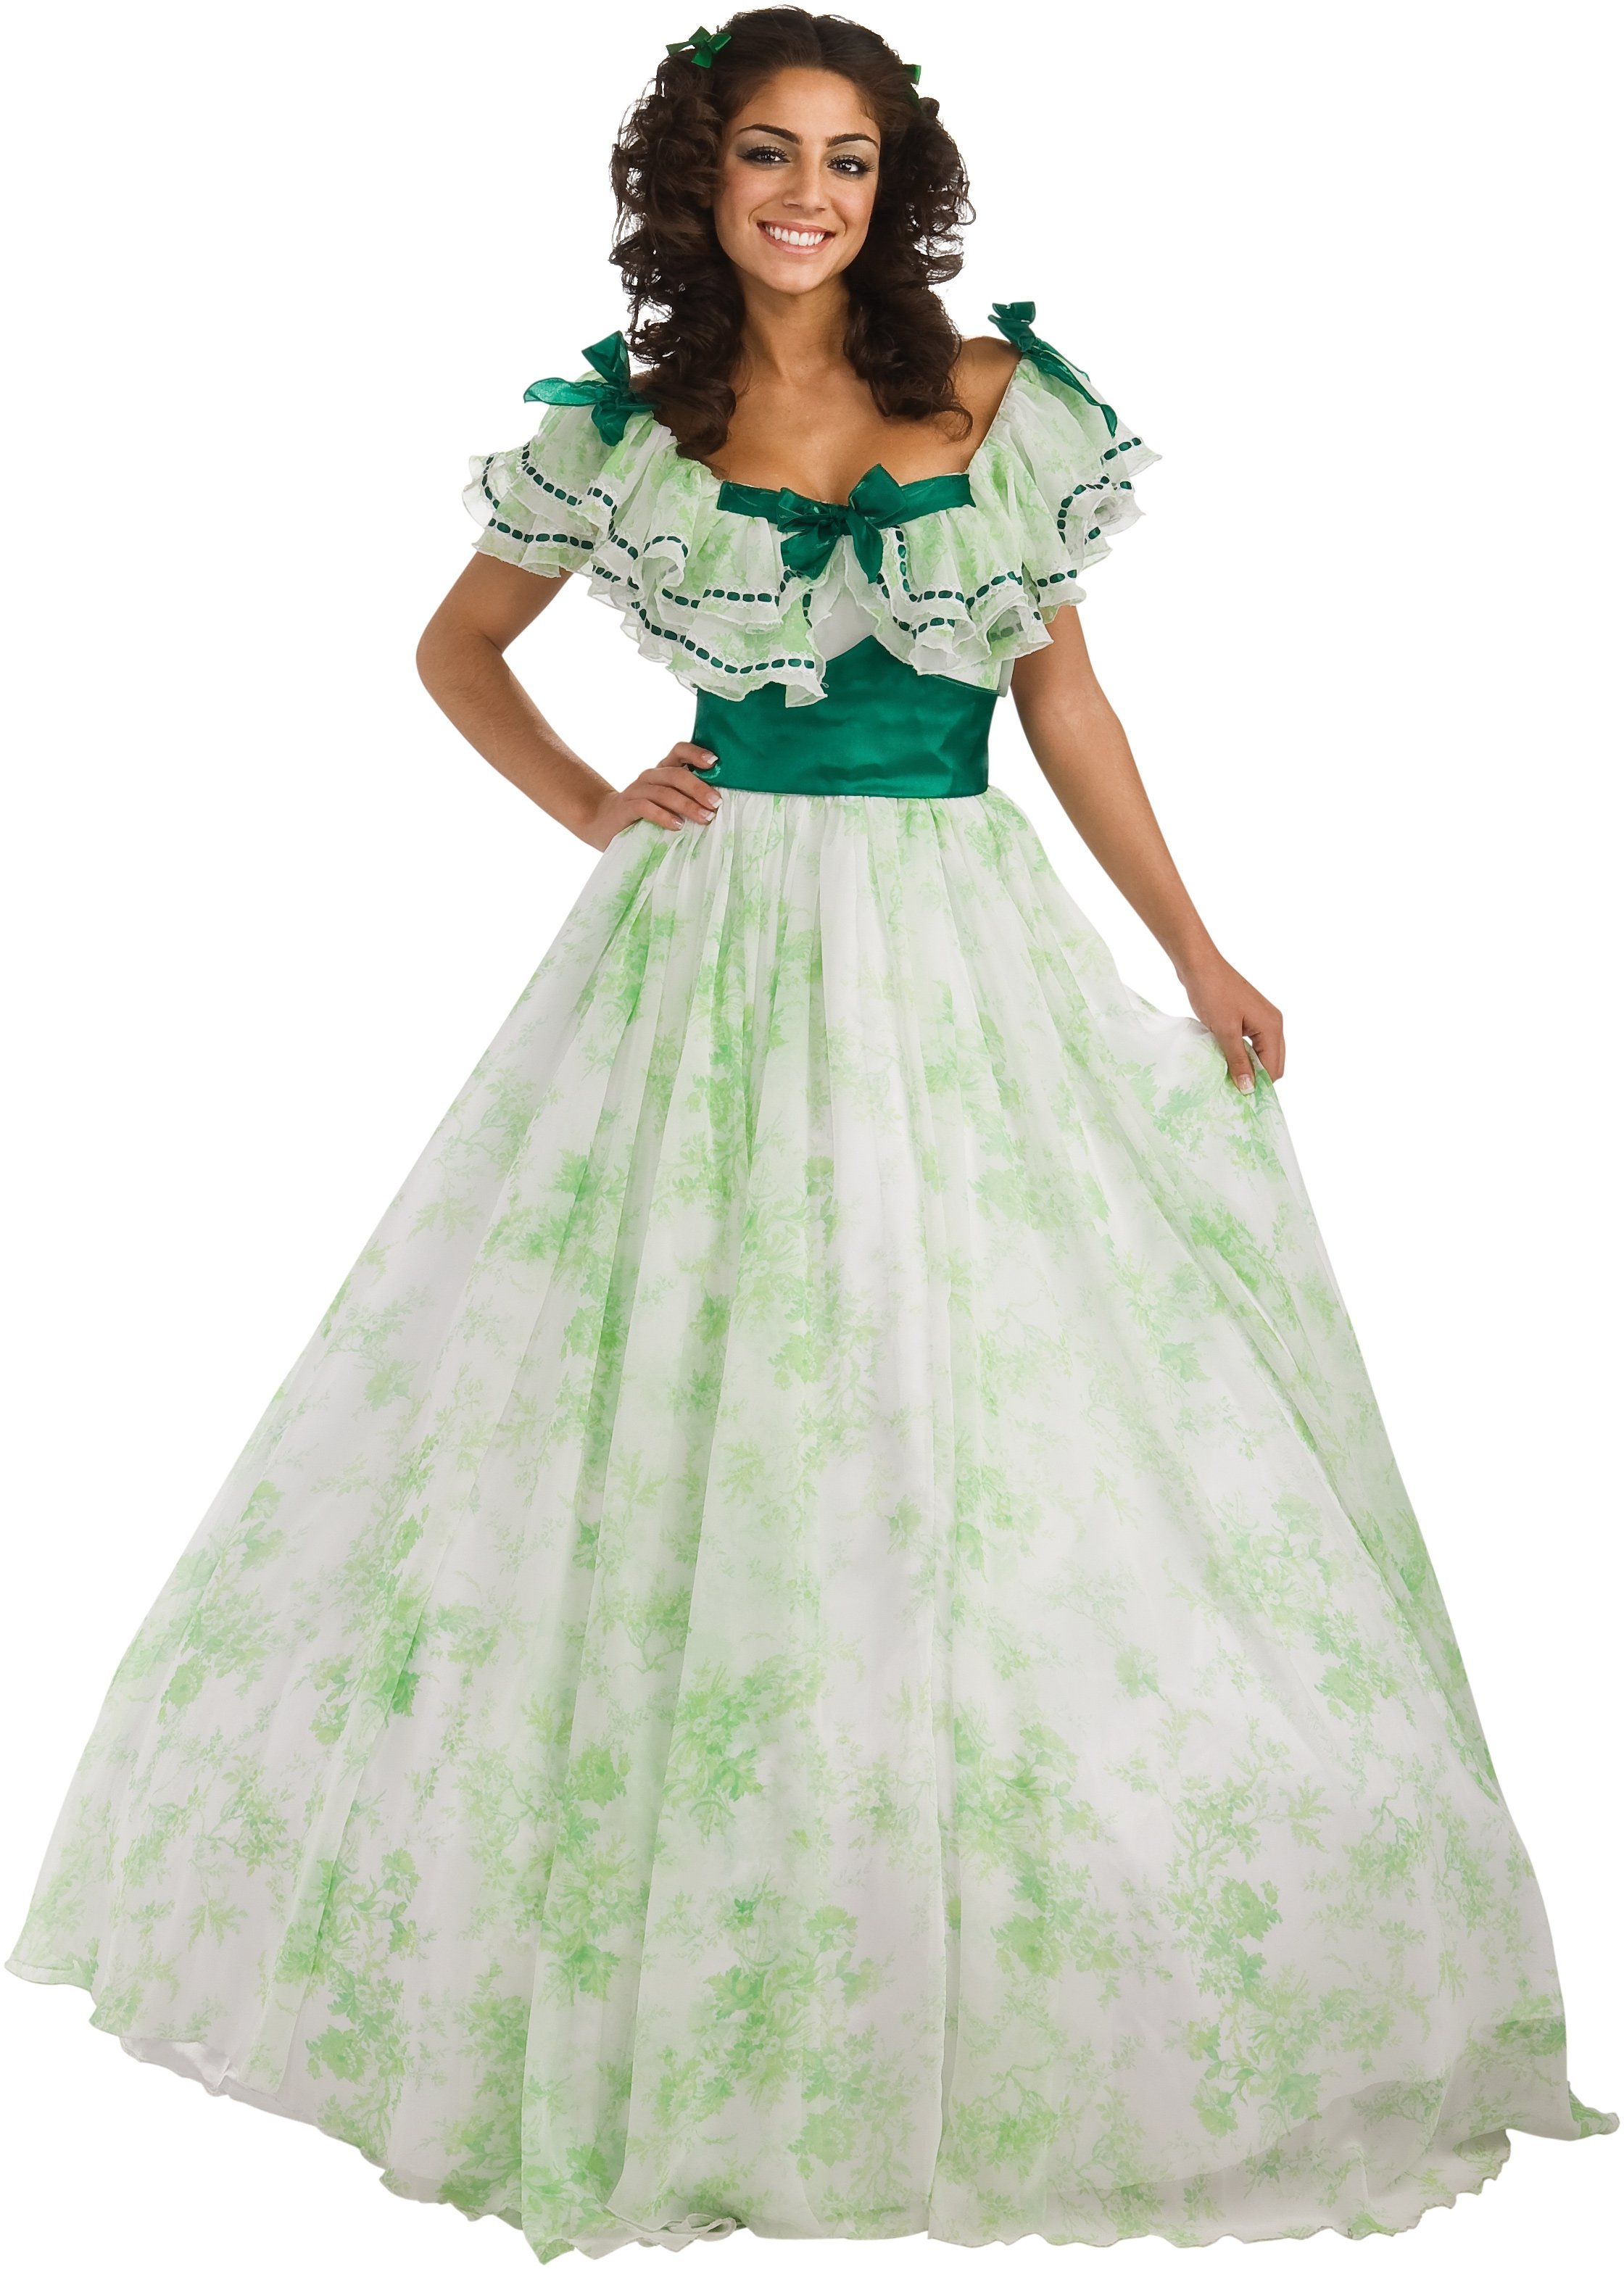 Gone With The Wind - Scarlett Picnic Dress Adult Costume